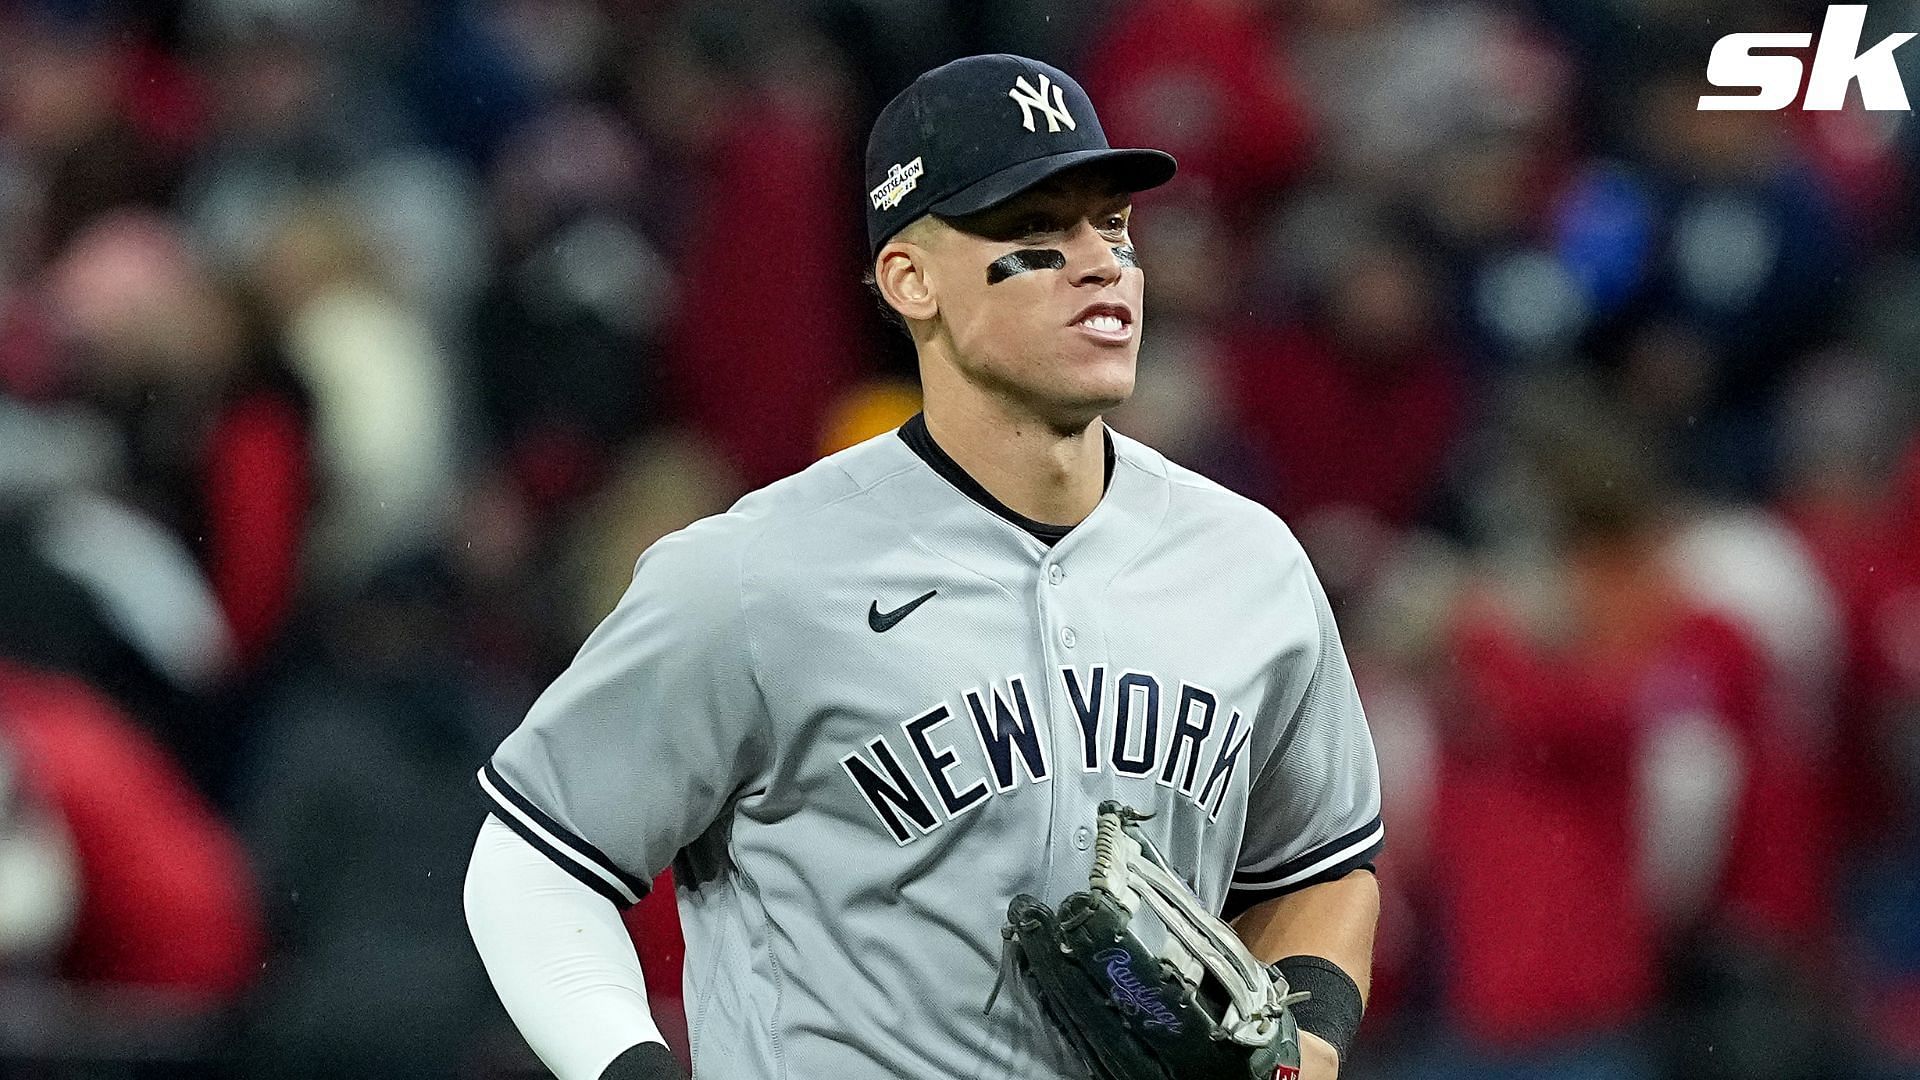 Yankees fan took baseball from Aaron Judge out of a young kid's glove